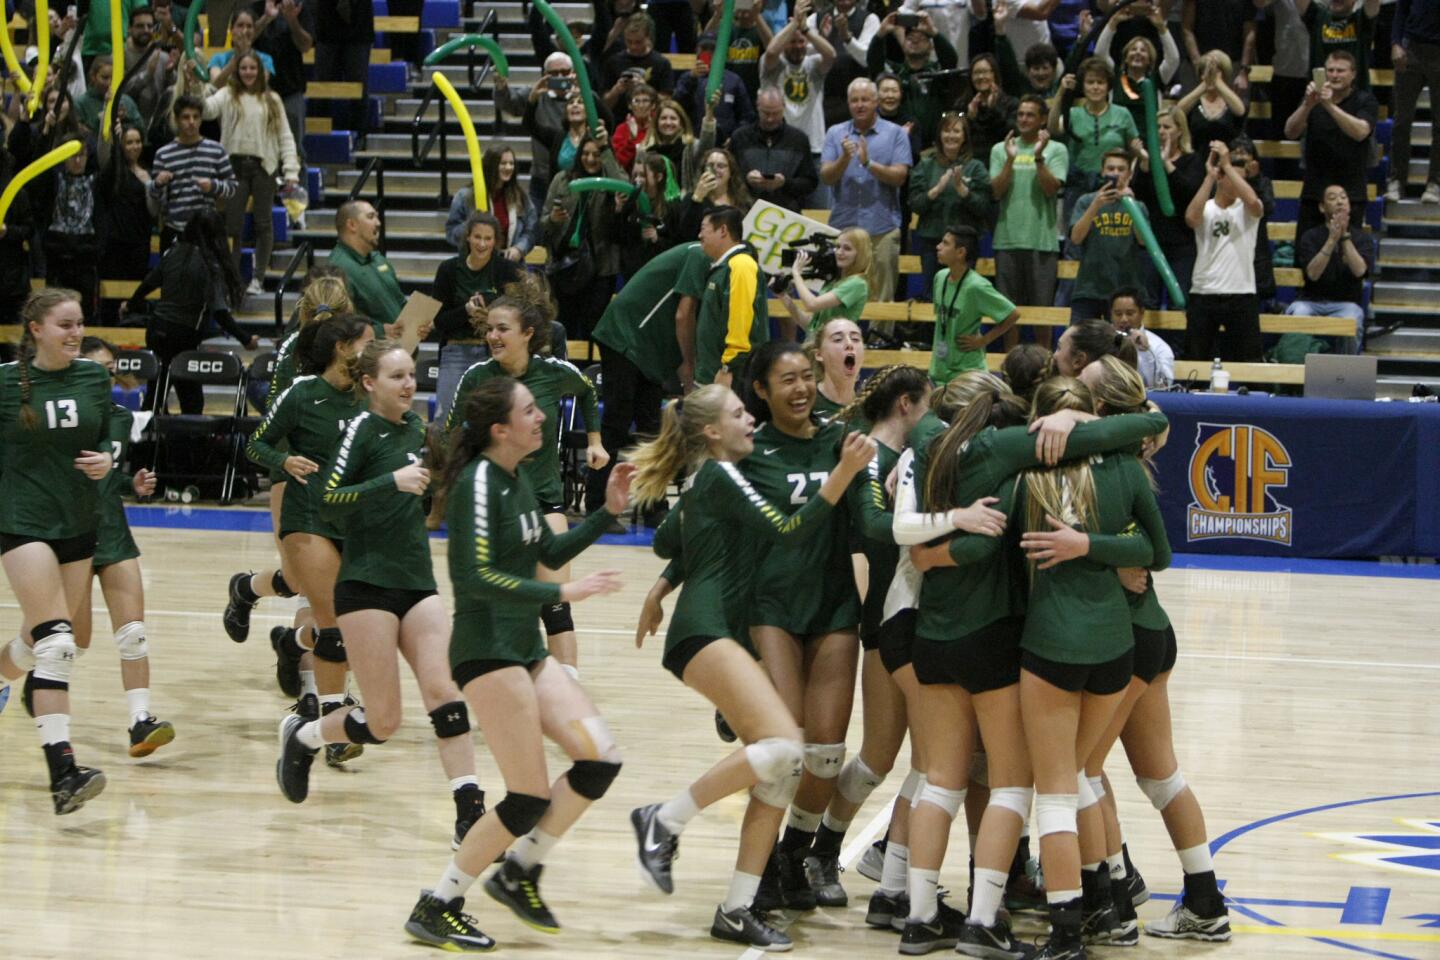 Edison High School volleyball team celebrates the CIF State Division 1 championship win over Menlo Atherton at Santiago Canyon College in Orange, on Friday, Dec. 2, 2016.